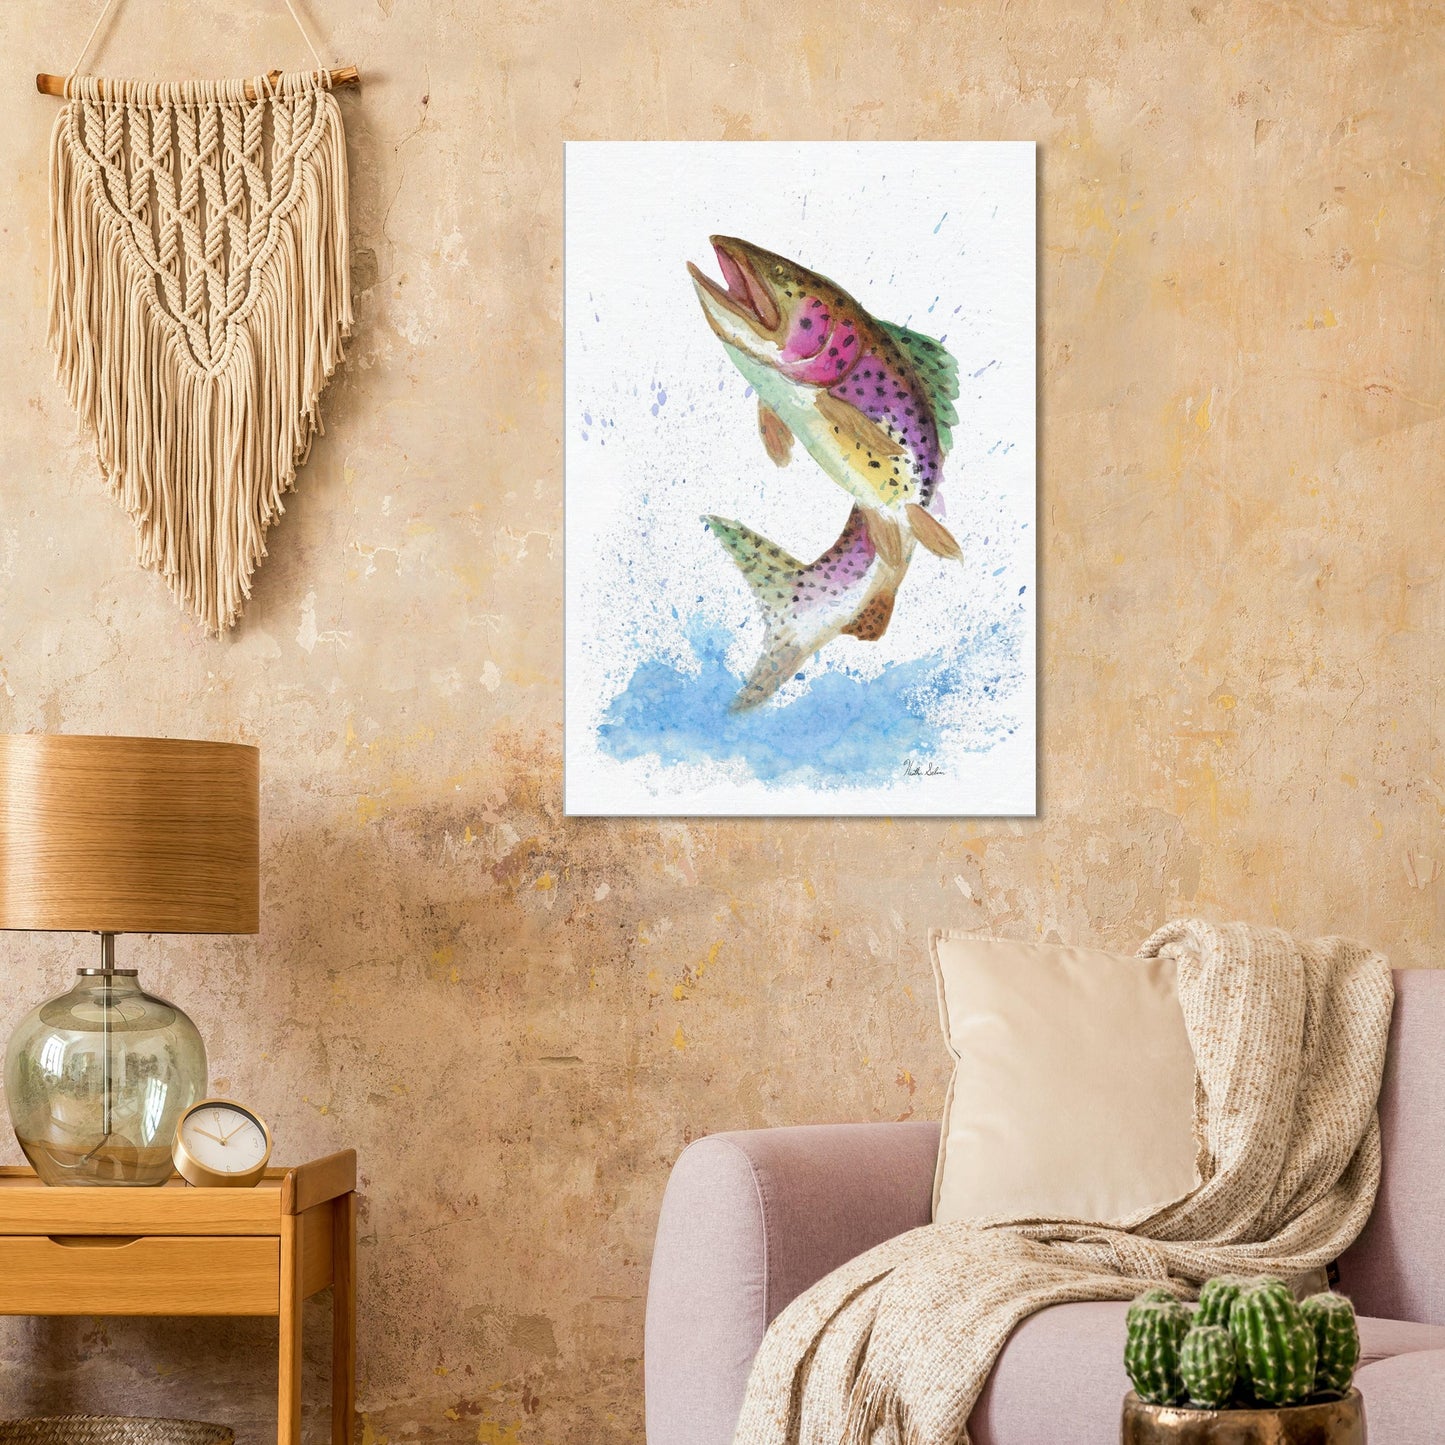 28 by 40 inch slim canvas wall art print featuring a watercolor painting of a rainbow trout leaping from the water. Shown on beige wall by macramé above pink sofa, wooden end table, and lamp.